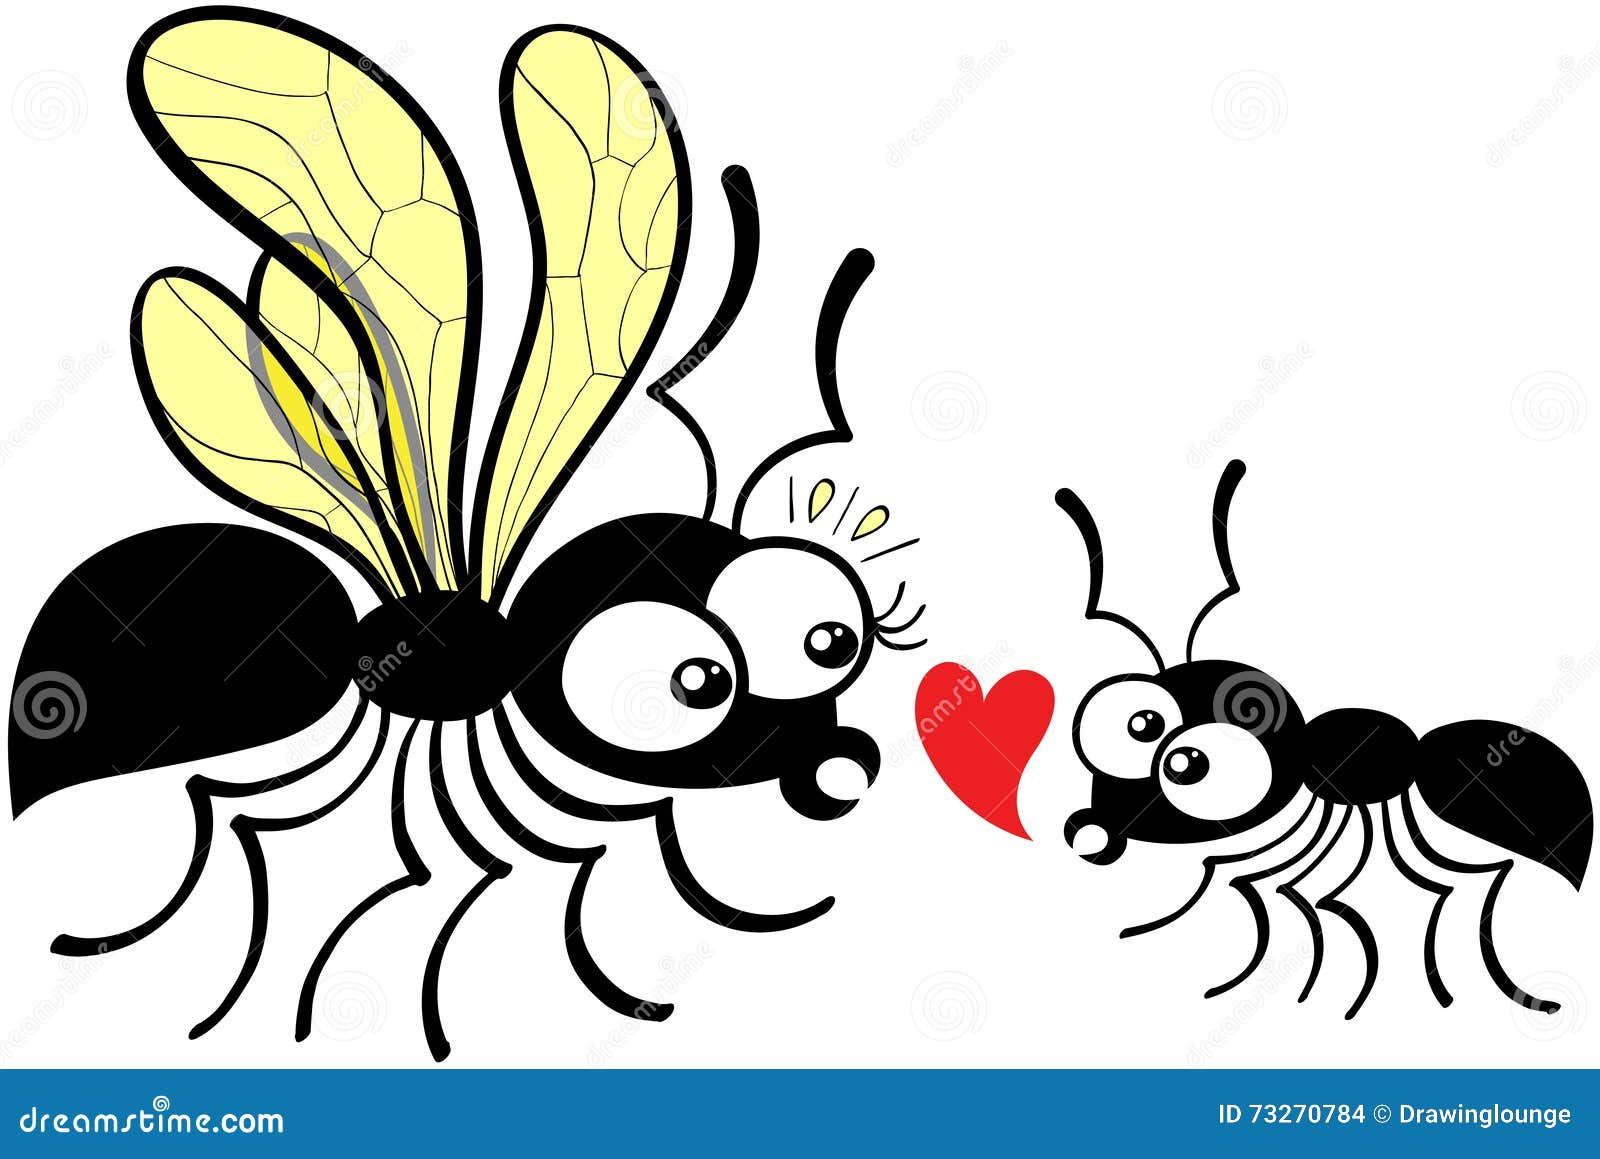 worker ant clipart - photo #32